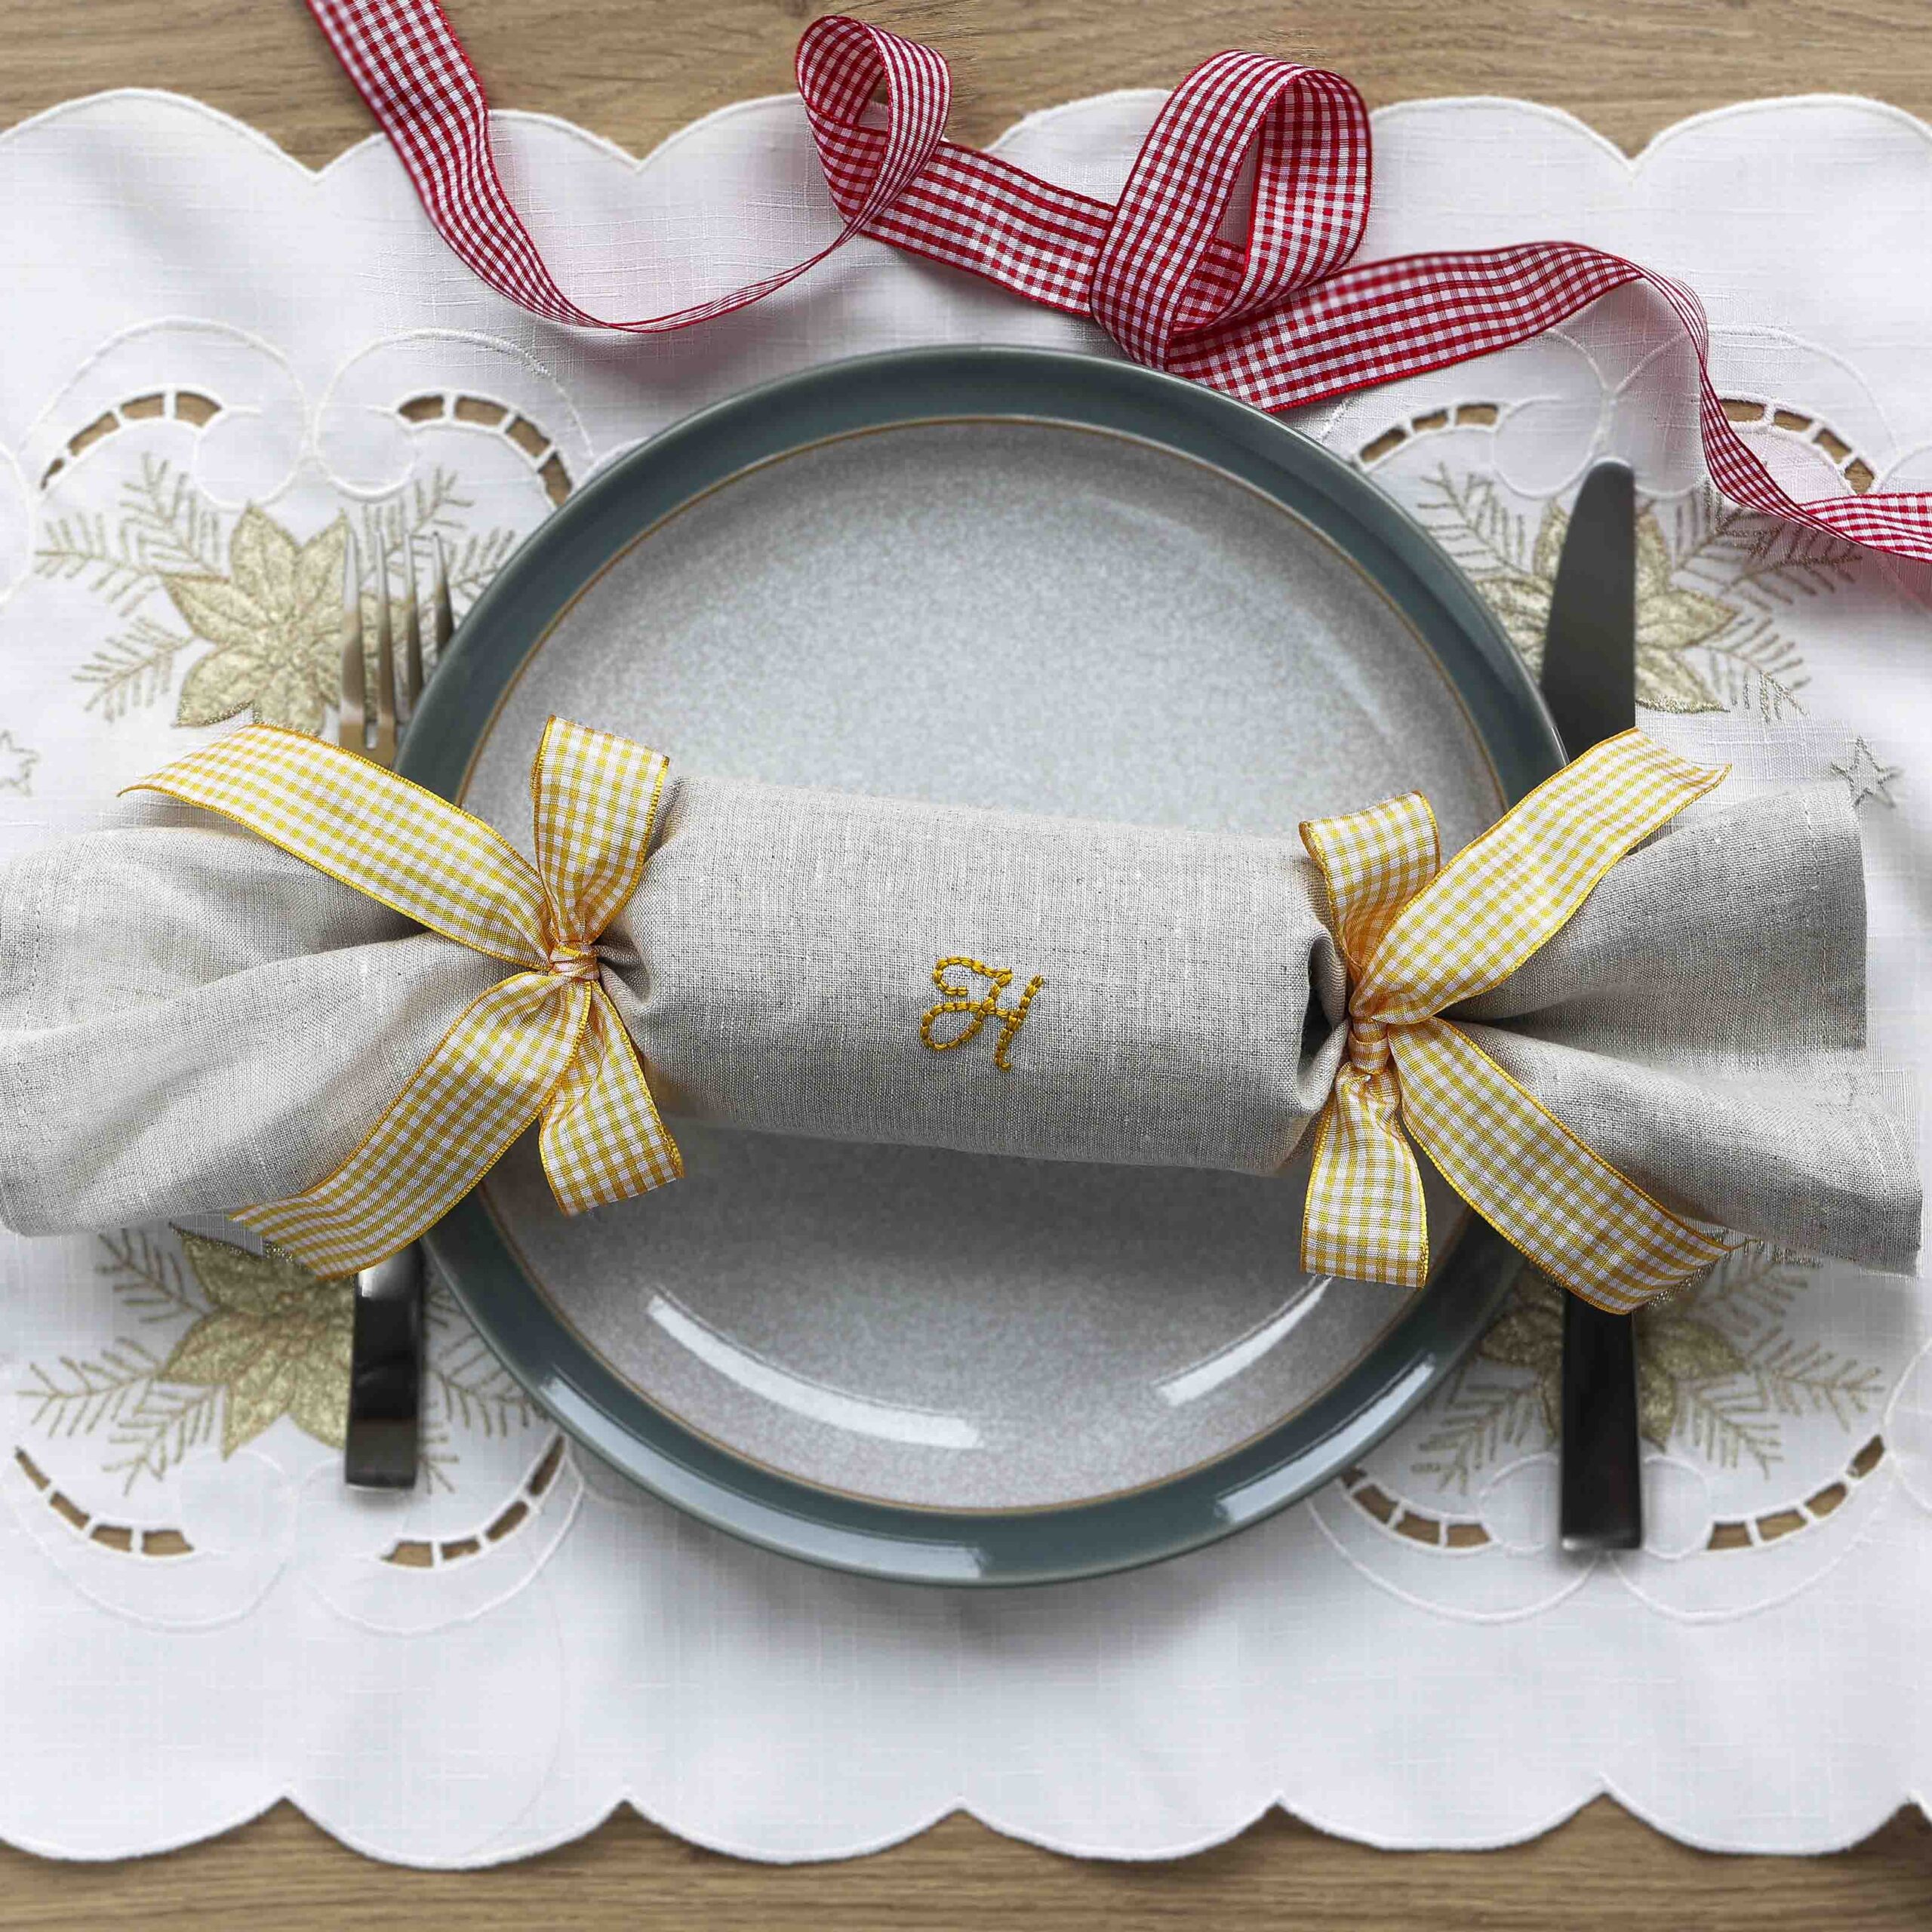 StephieAnn embroider your own Christmas crackers napkins